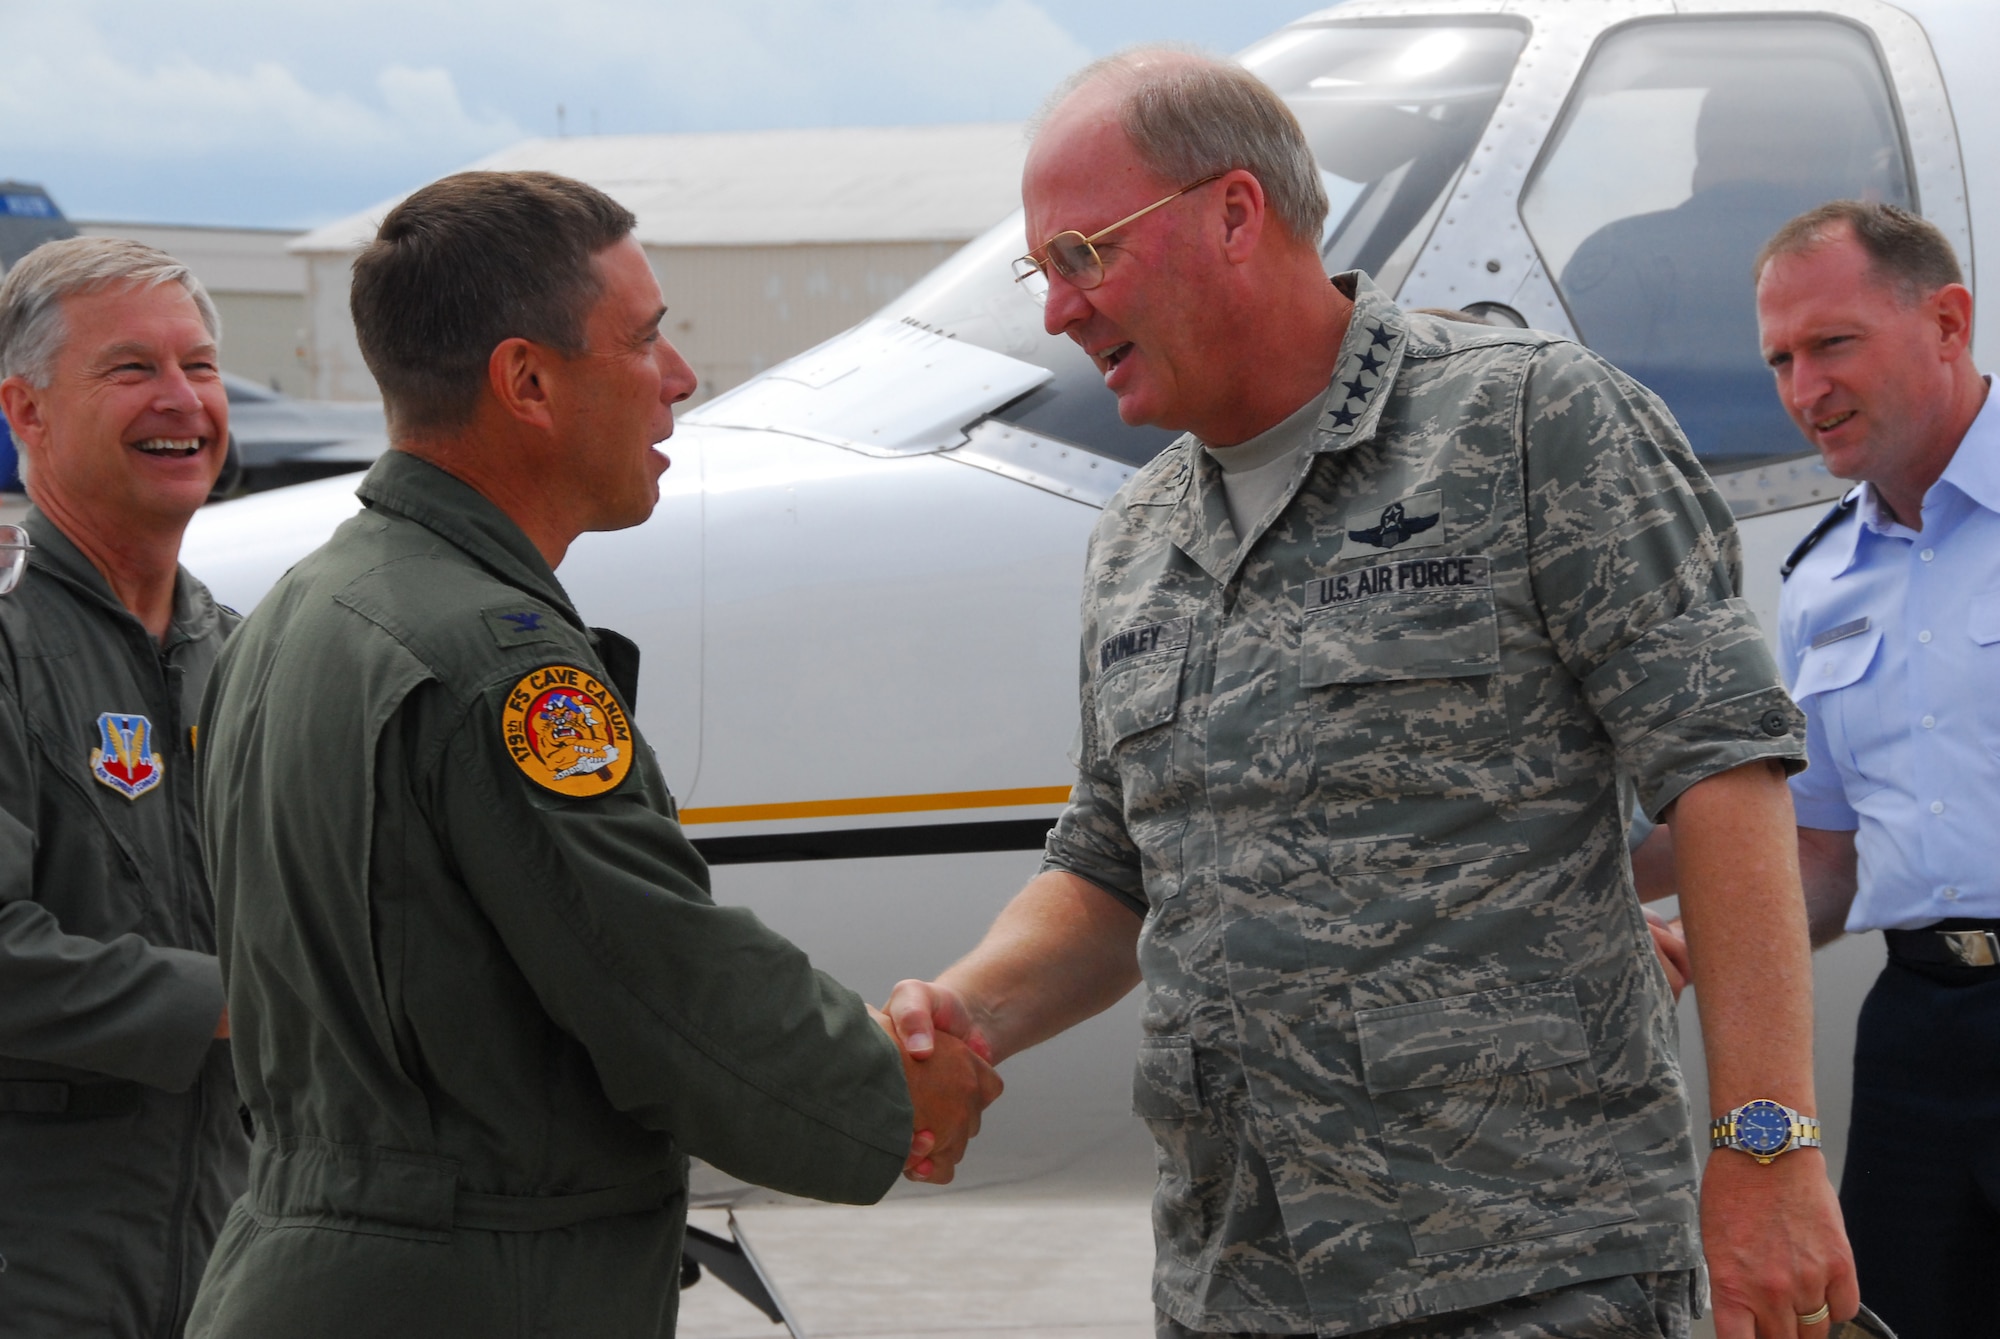 U.S. Air Force Col. Frank Stokes, Commander of the 148th Fighter Wing, Duluth, Minn., greets General Craig R. McKinley-Chief, National Guard Bureau, as he arrives at the wing for the Raytheon Trophy presentation July 31, 2009 in Duluth, Minn.  The Raytheon Trophy was awarded to the 179th Fighter Squadron of the 148th Fighter Wing as the most outstanding air defense unit in the U.S. Air Force, marking only the fourth time an Air National Guard unit received this award since its inception in 1953.  (U.S. Air Force photo by Tech. Sgt. Brett R. Ewald)